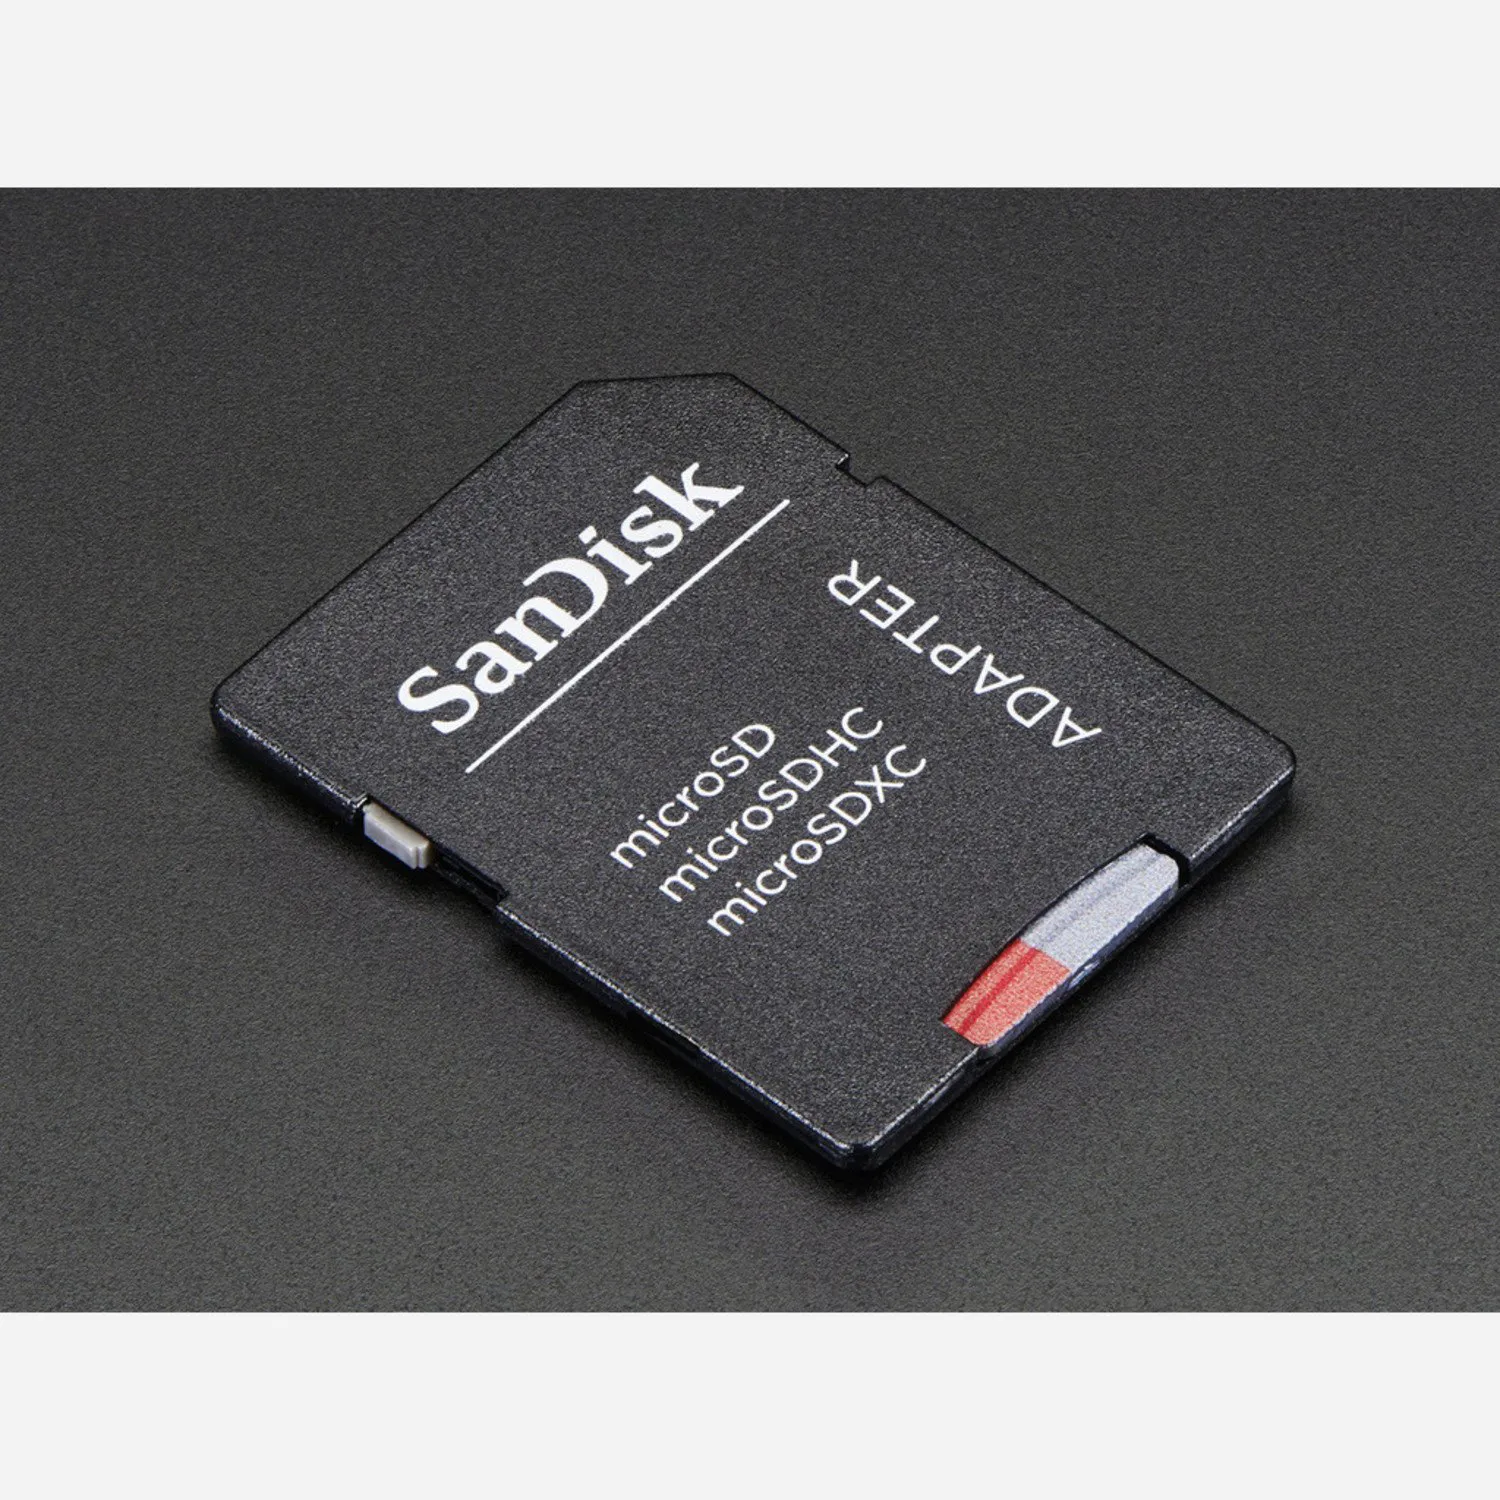 Photo of 8GB Class 10 SD/MicroSD Memory Card - SD Adapter Included